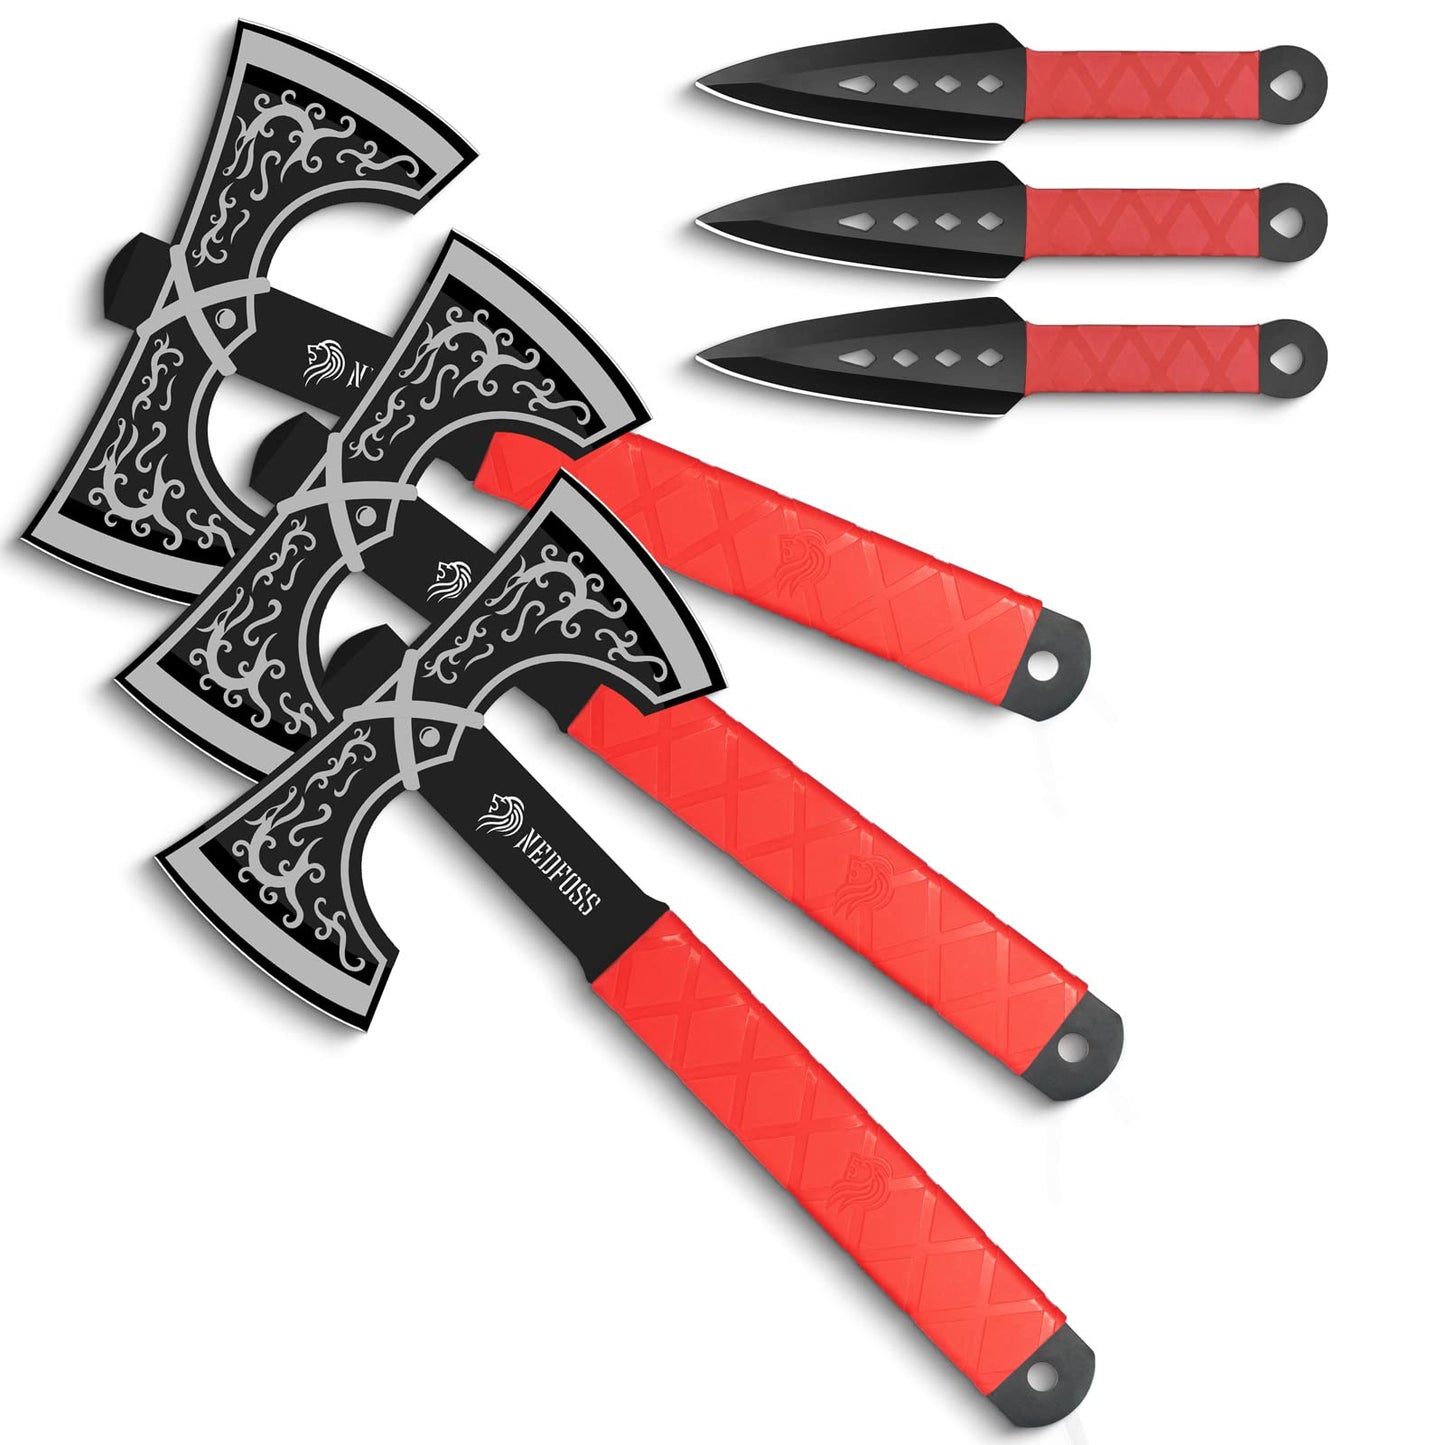 Modern Full Tang Throwing Knife and Throwing Axe Set, Pack of 6